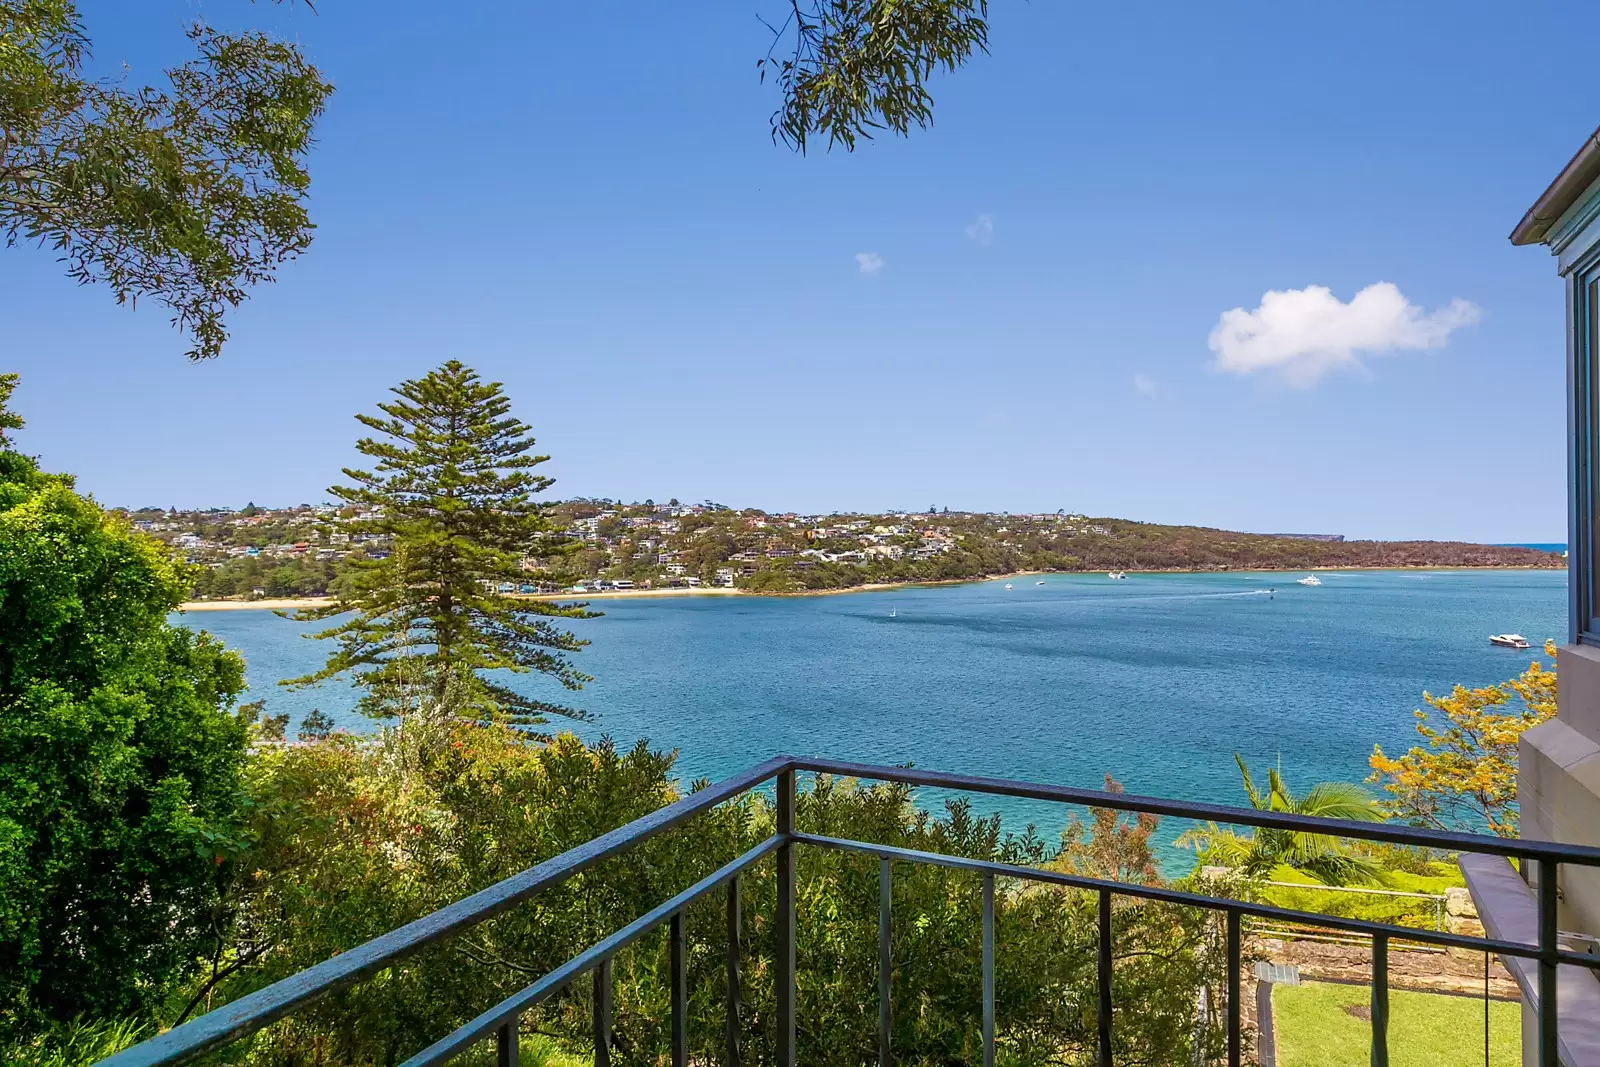 Photo #6: 51 Parriwi Road, Mosman - Sold by Sydney Sotheby's International Realty